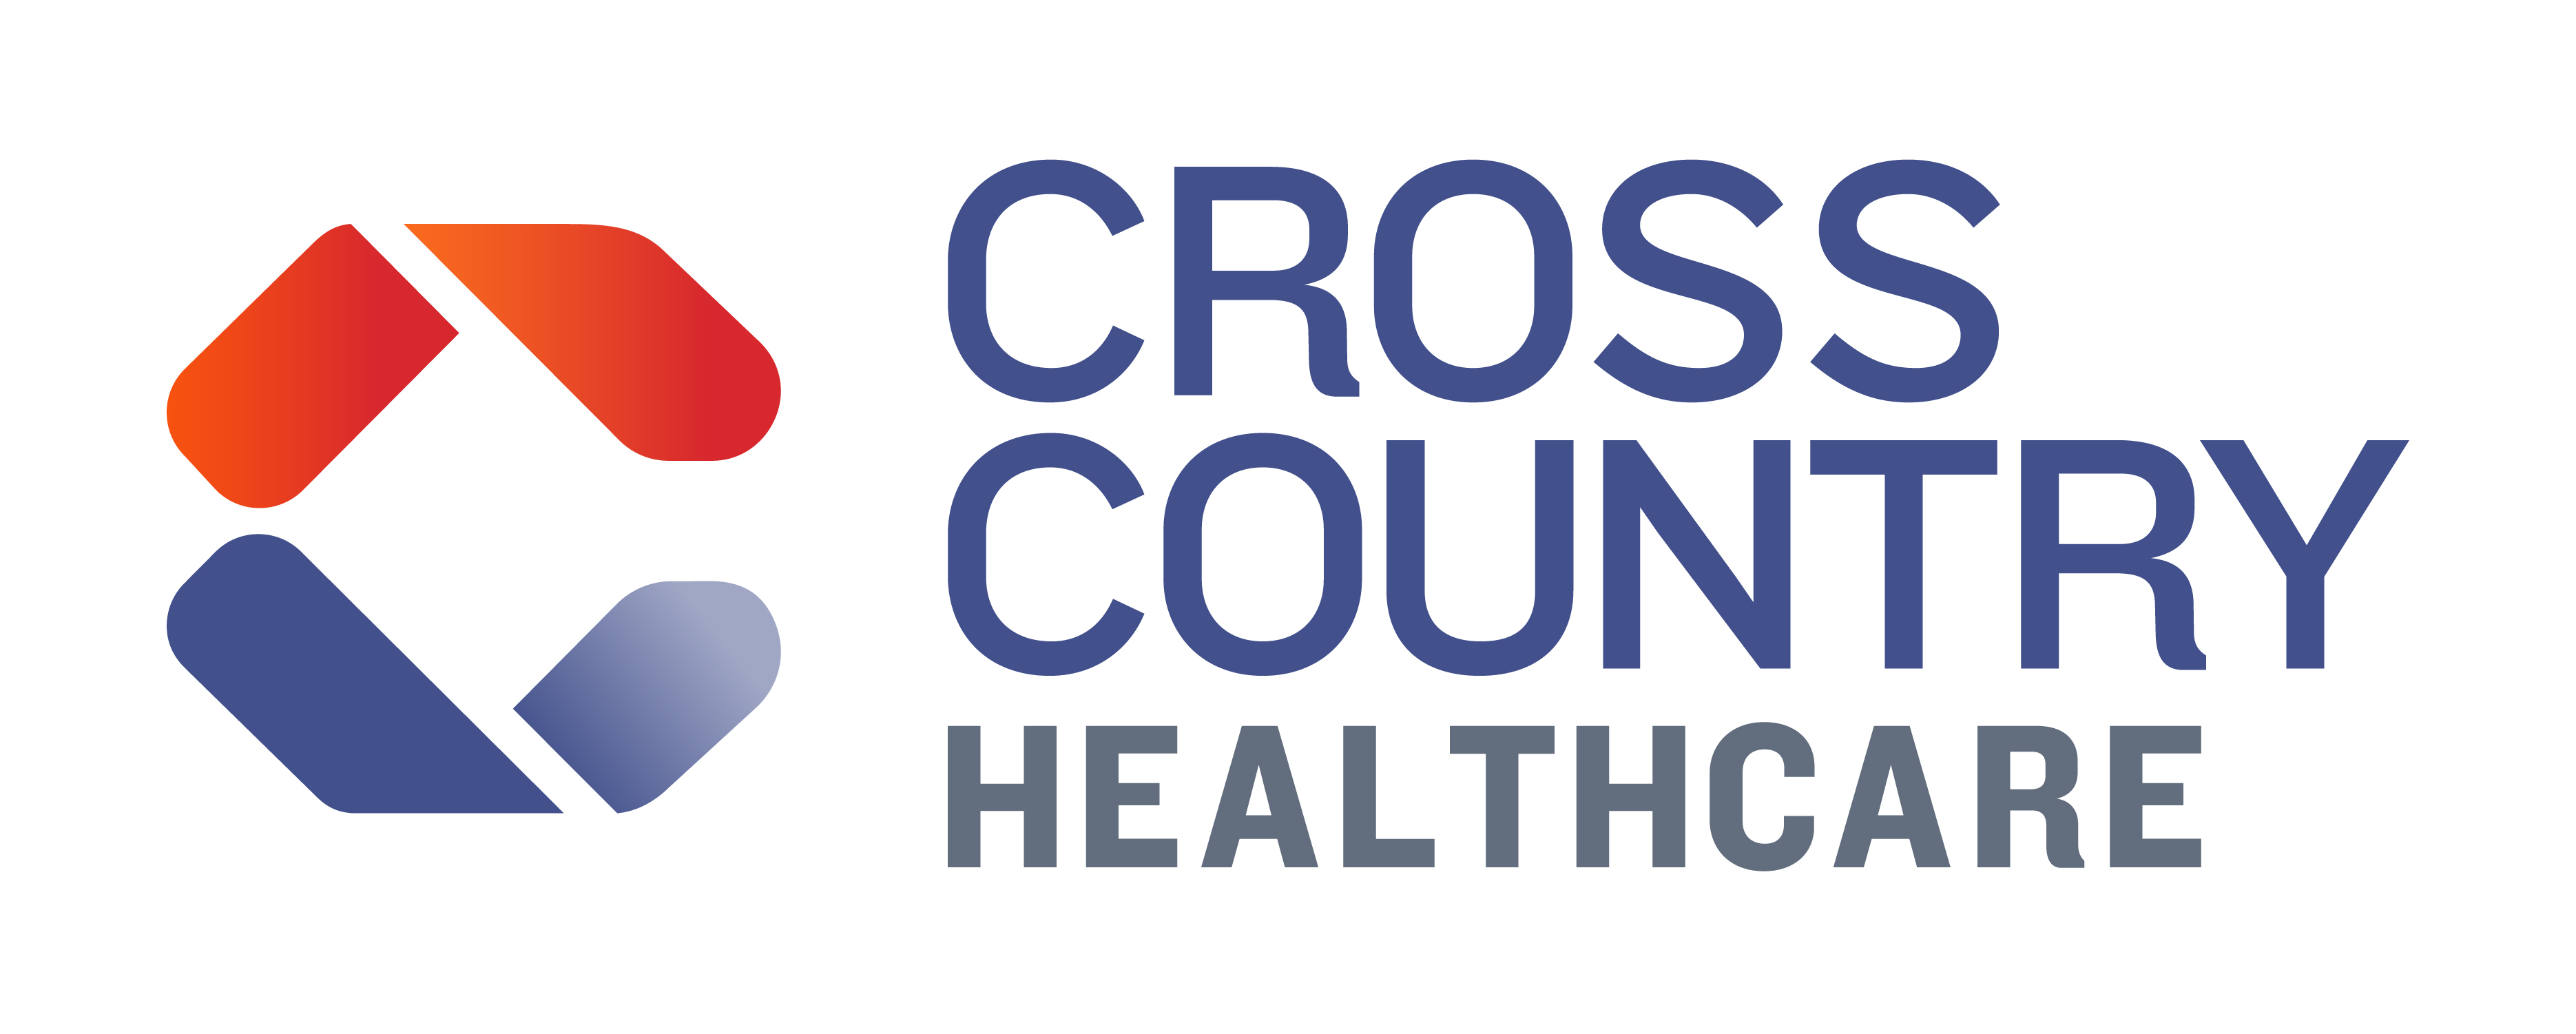 A  Cross Country Healthcare (Presenting)